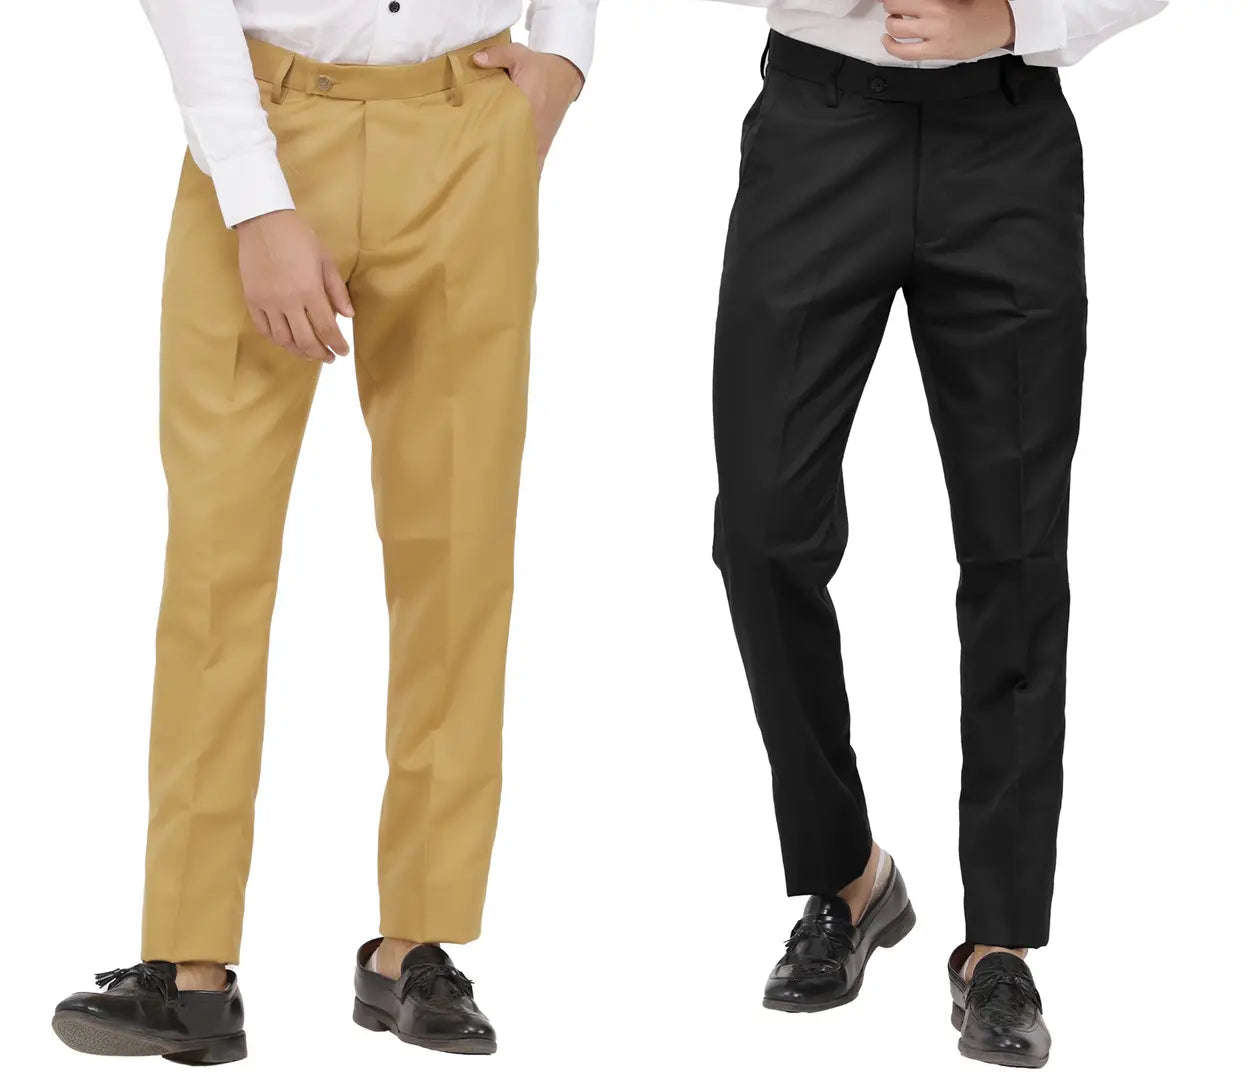 Kundan Men Poly-Viscose Blended Khaki and Black Formal Trousers ( Pack of 2 Trousers )